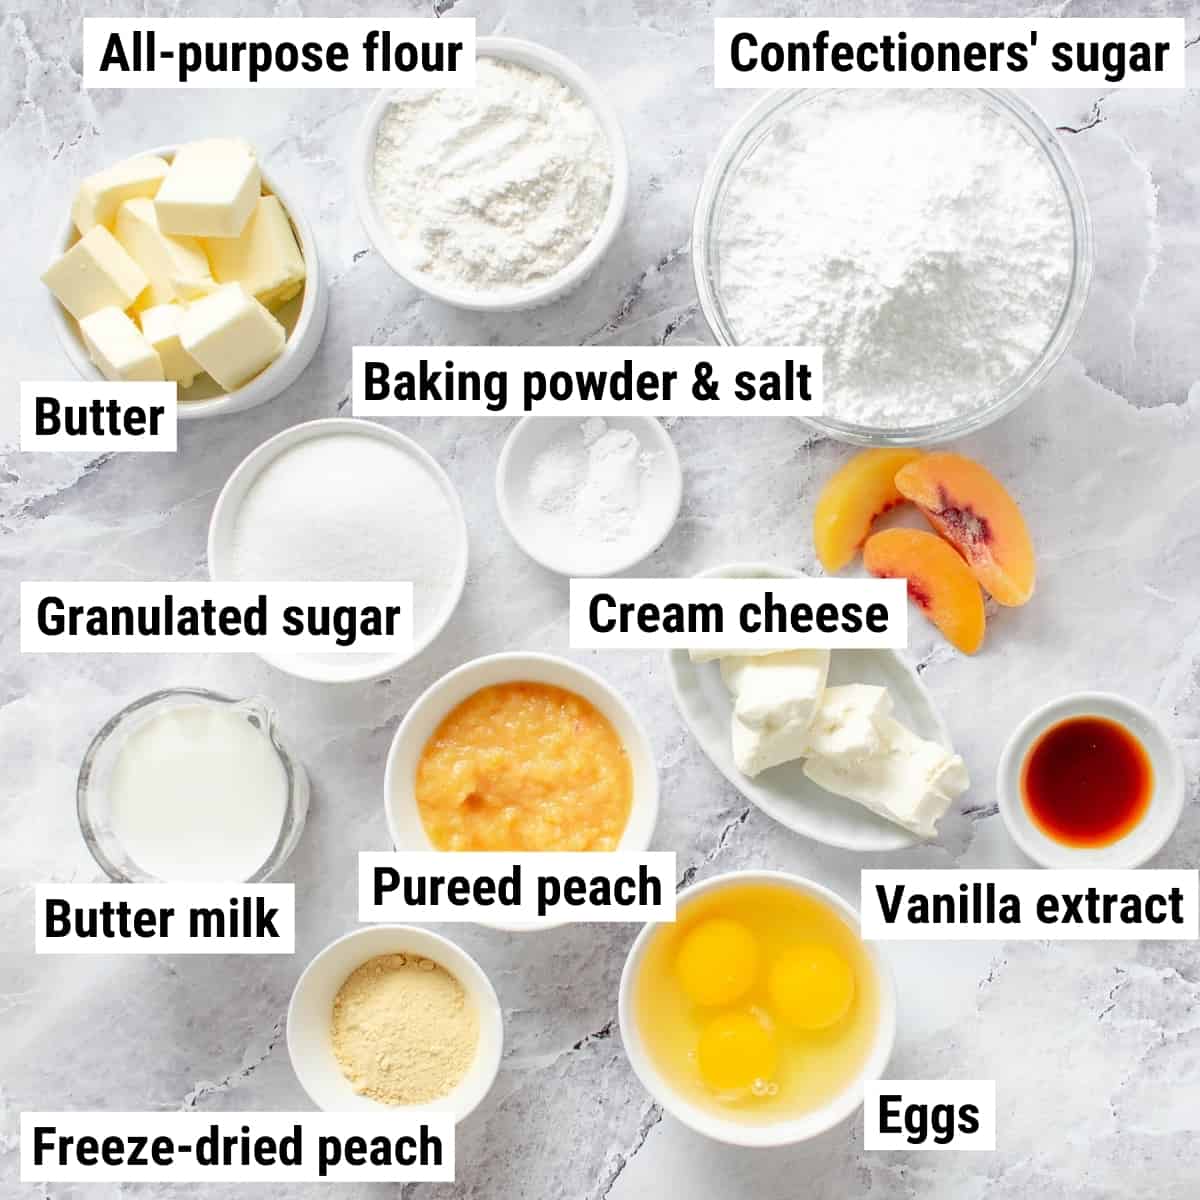 The ingredients to make peach cupcakes spread out on a table.